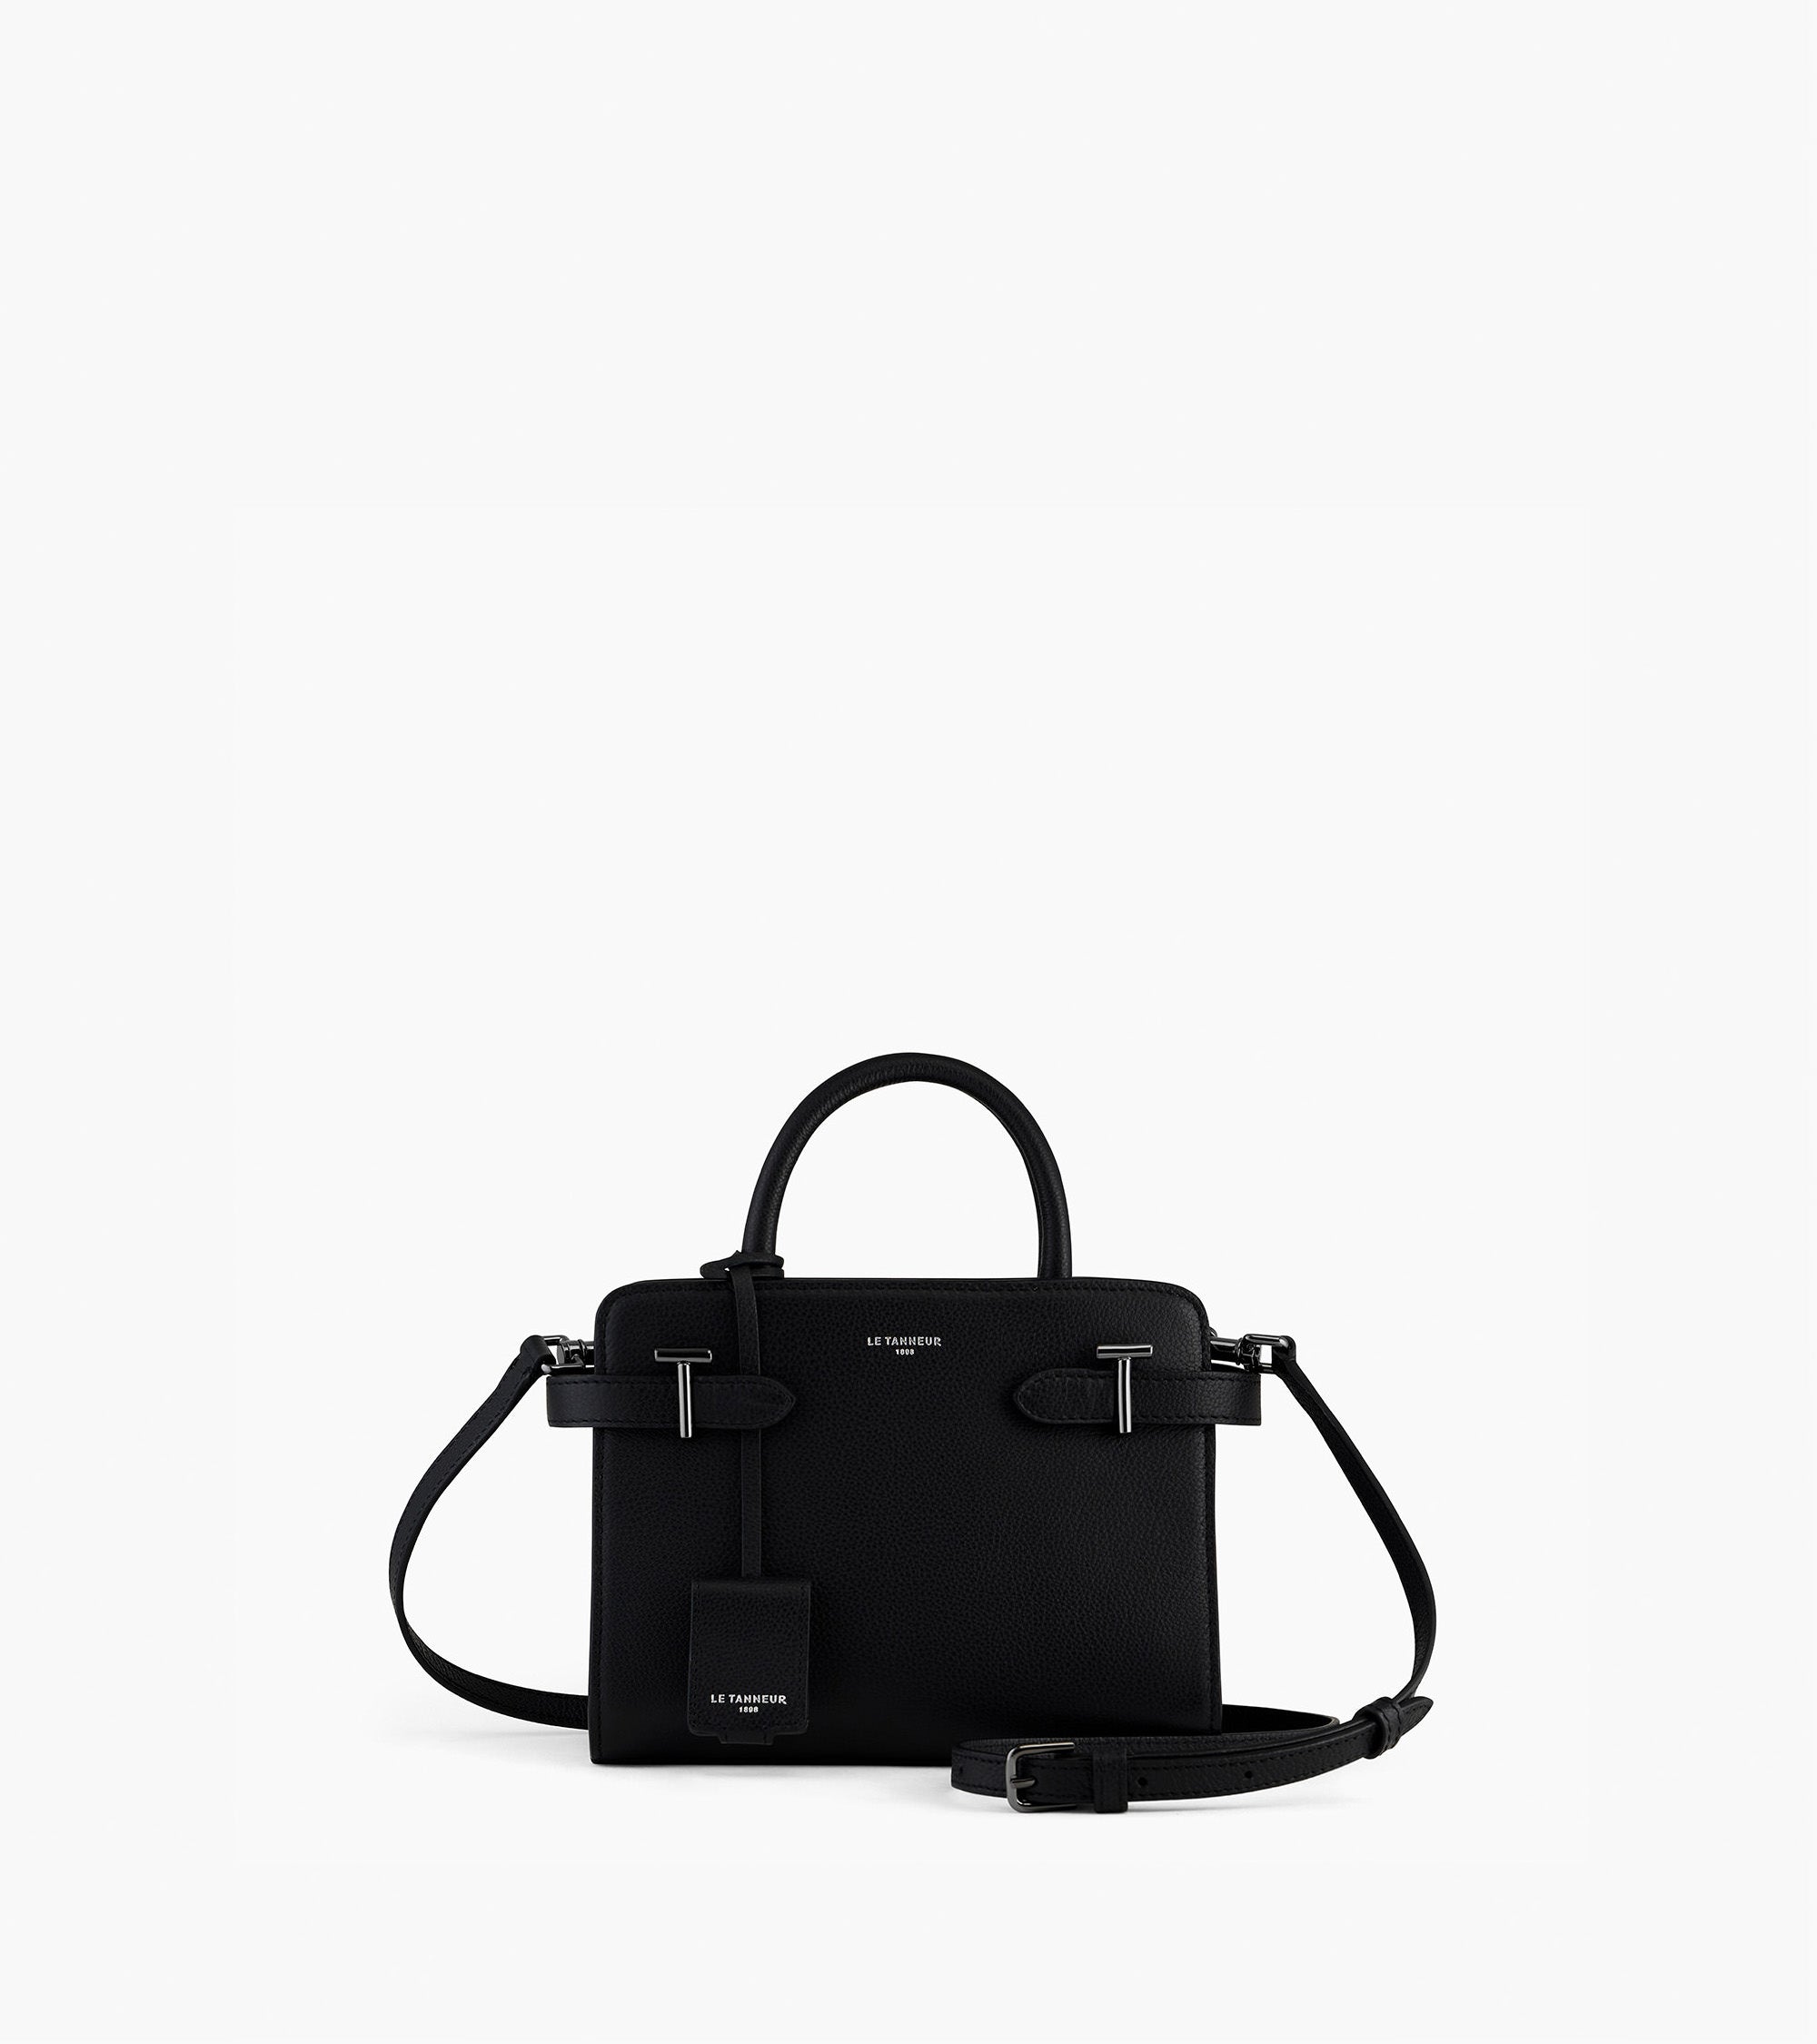 Emilie small handbag in pebbled leather